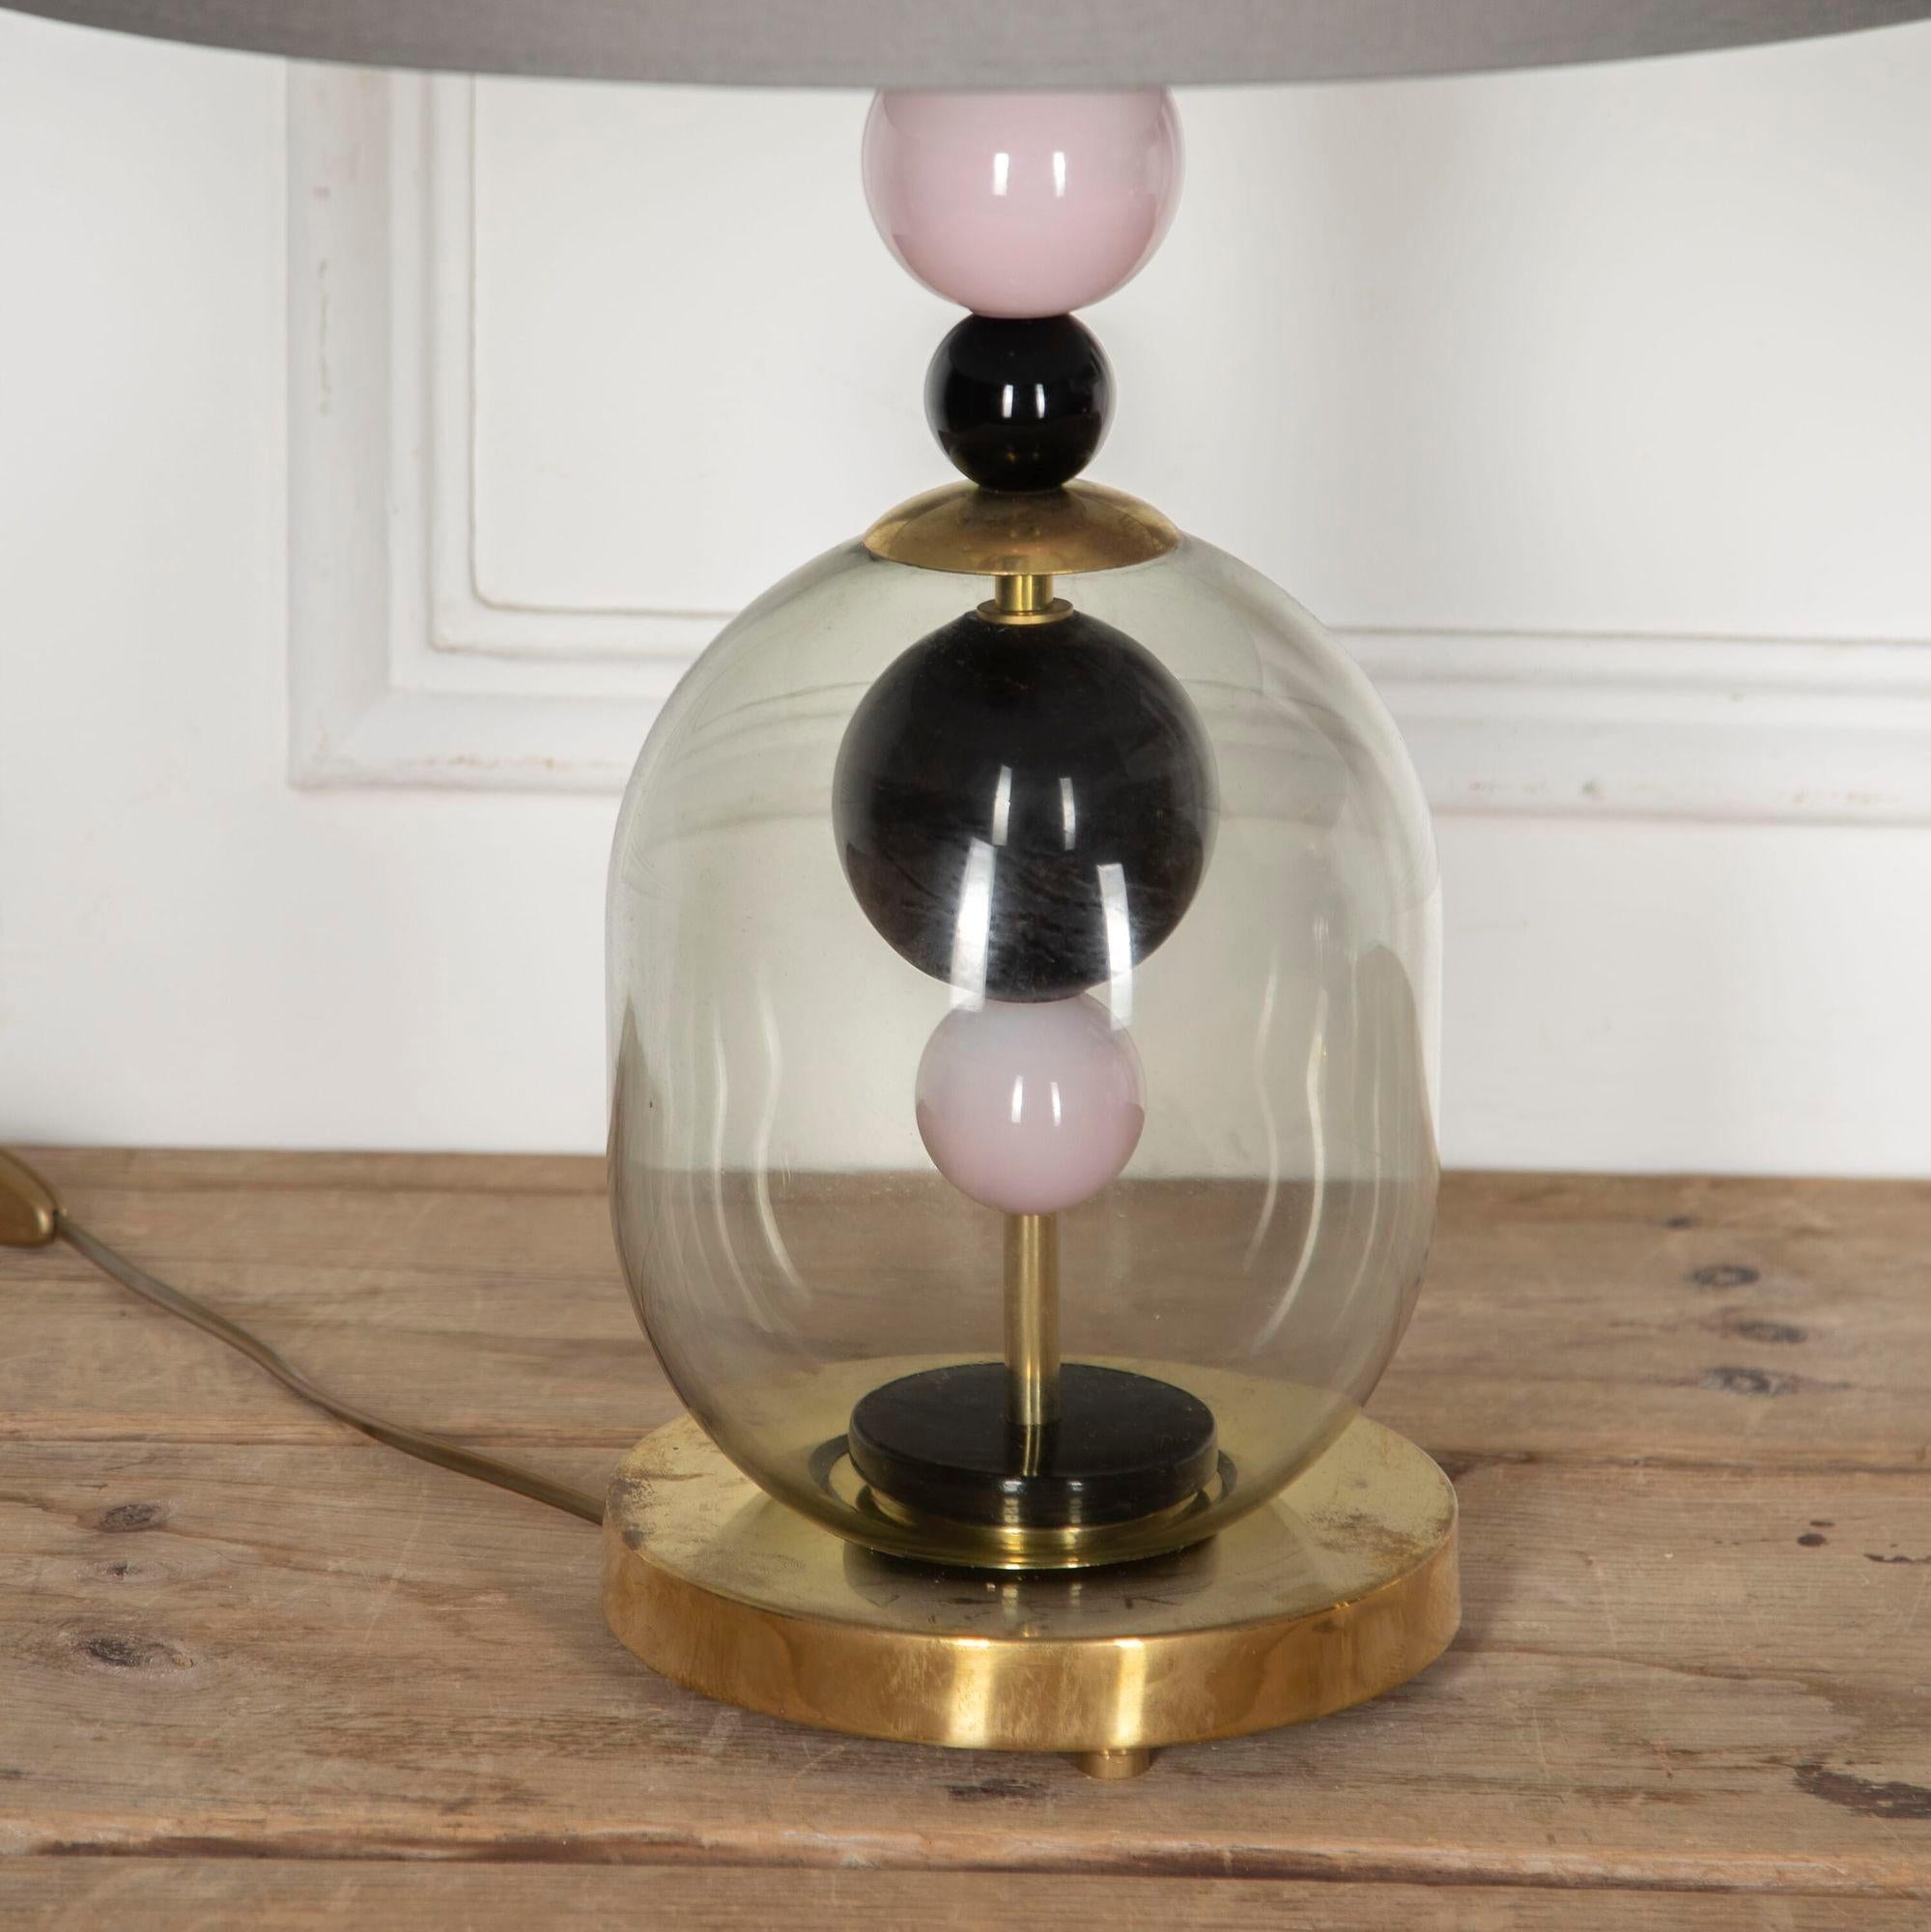 Beautiful contemporary designer table lamps from Murano, Italy.
With pink glass balls inside the transparent domes.
These lamps will make for very elegant additions to a living room!
This item has passed PAT testing according to UK standards.